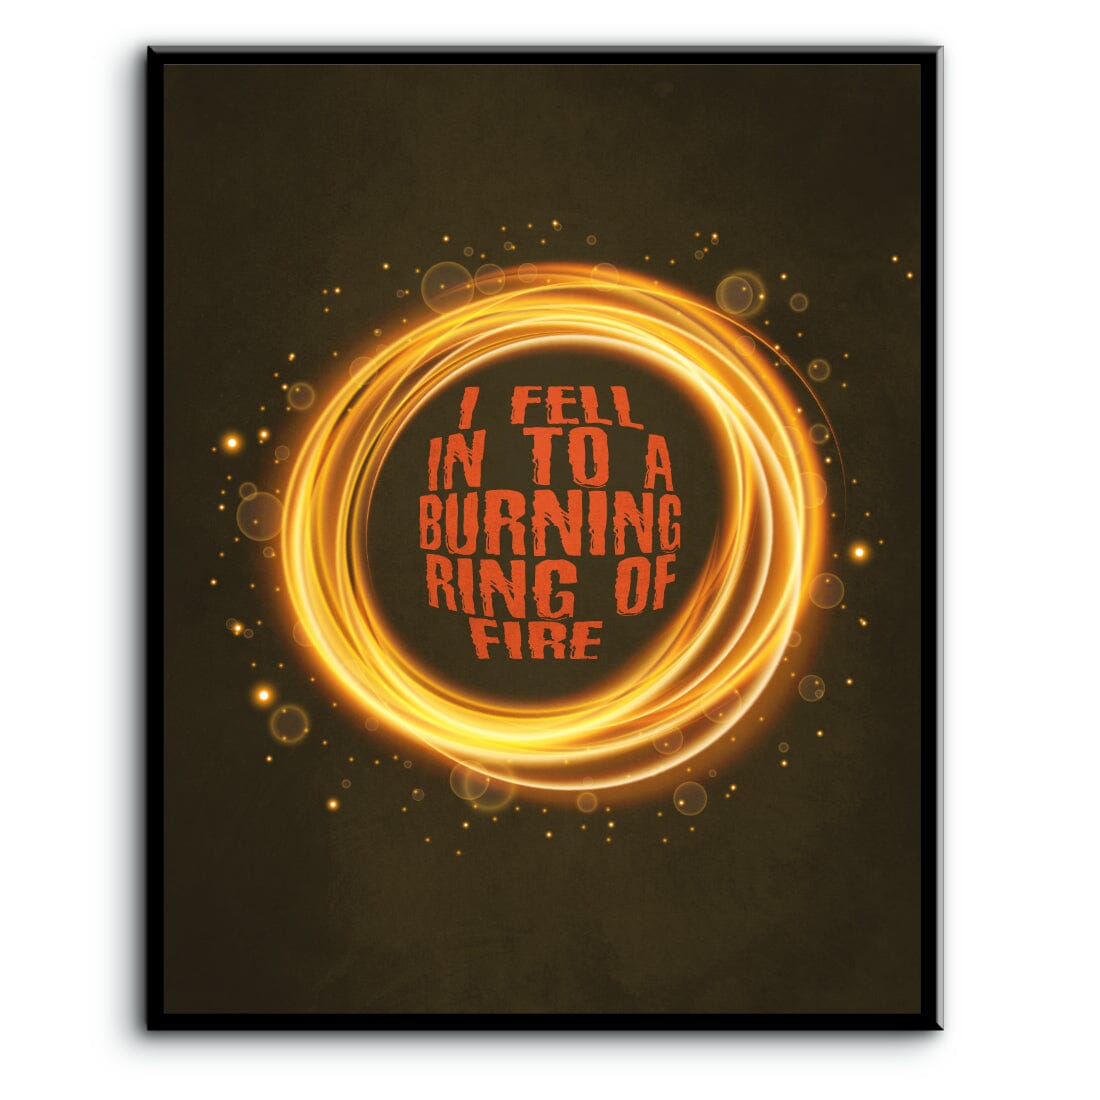 Ring of Fire by Johnny Cash - Country Music Song Lyrics Art Song Lyrics Art Song Lyrics Art 8x10 Framed Print (without mat) 